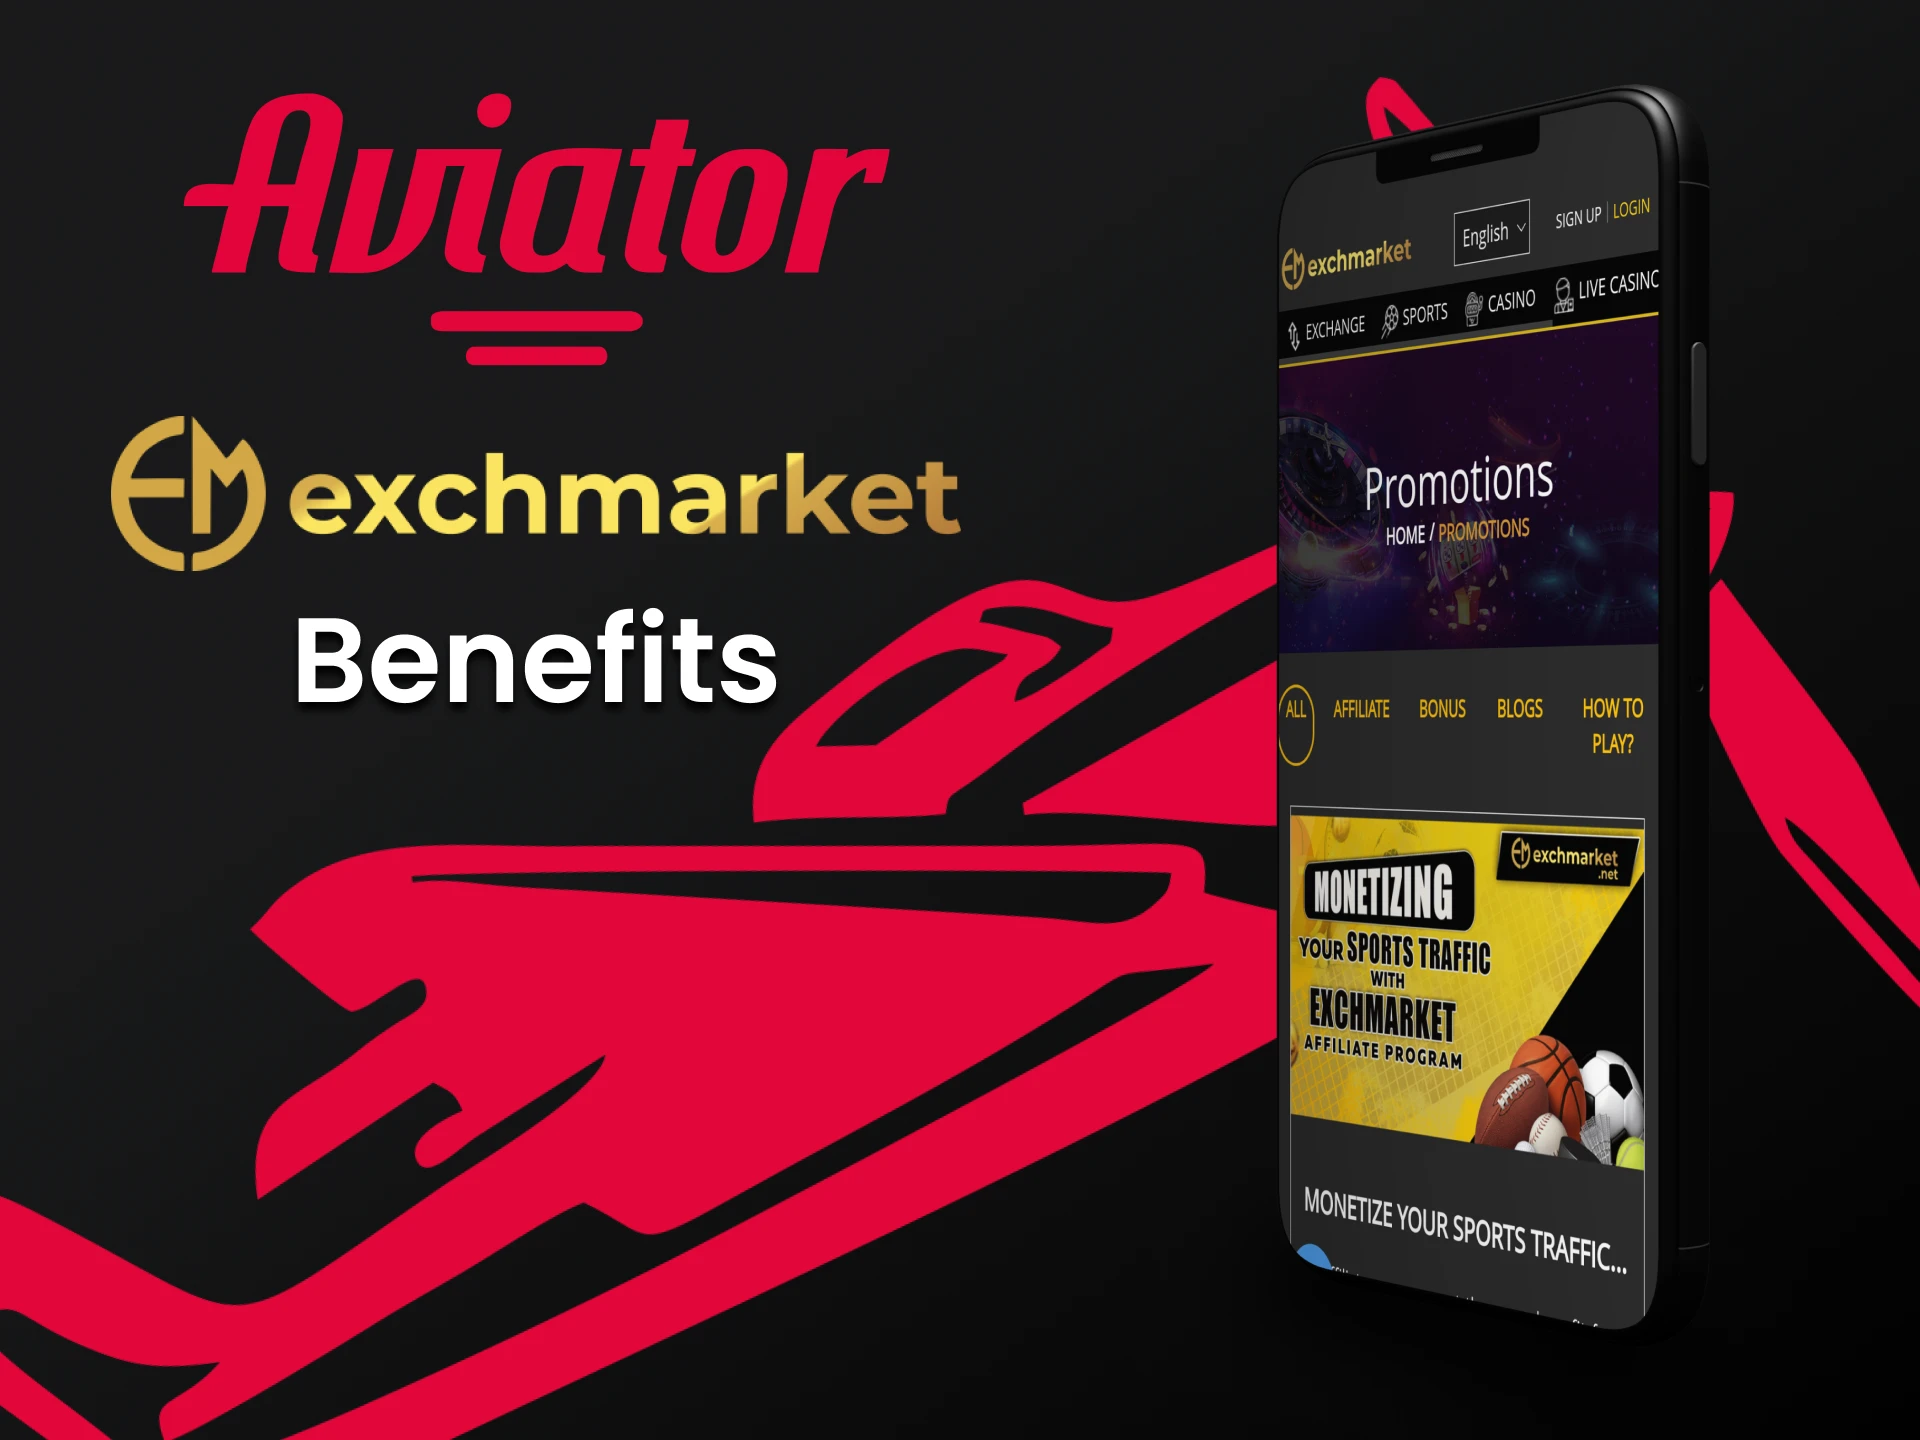 You will get many benefits by playing Aviator through the Exchmarket app.